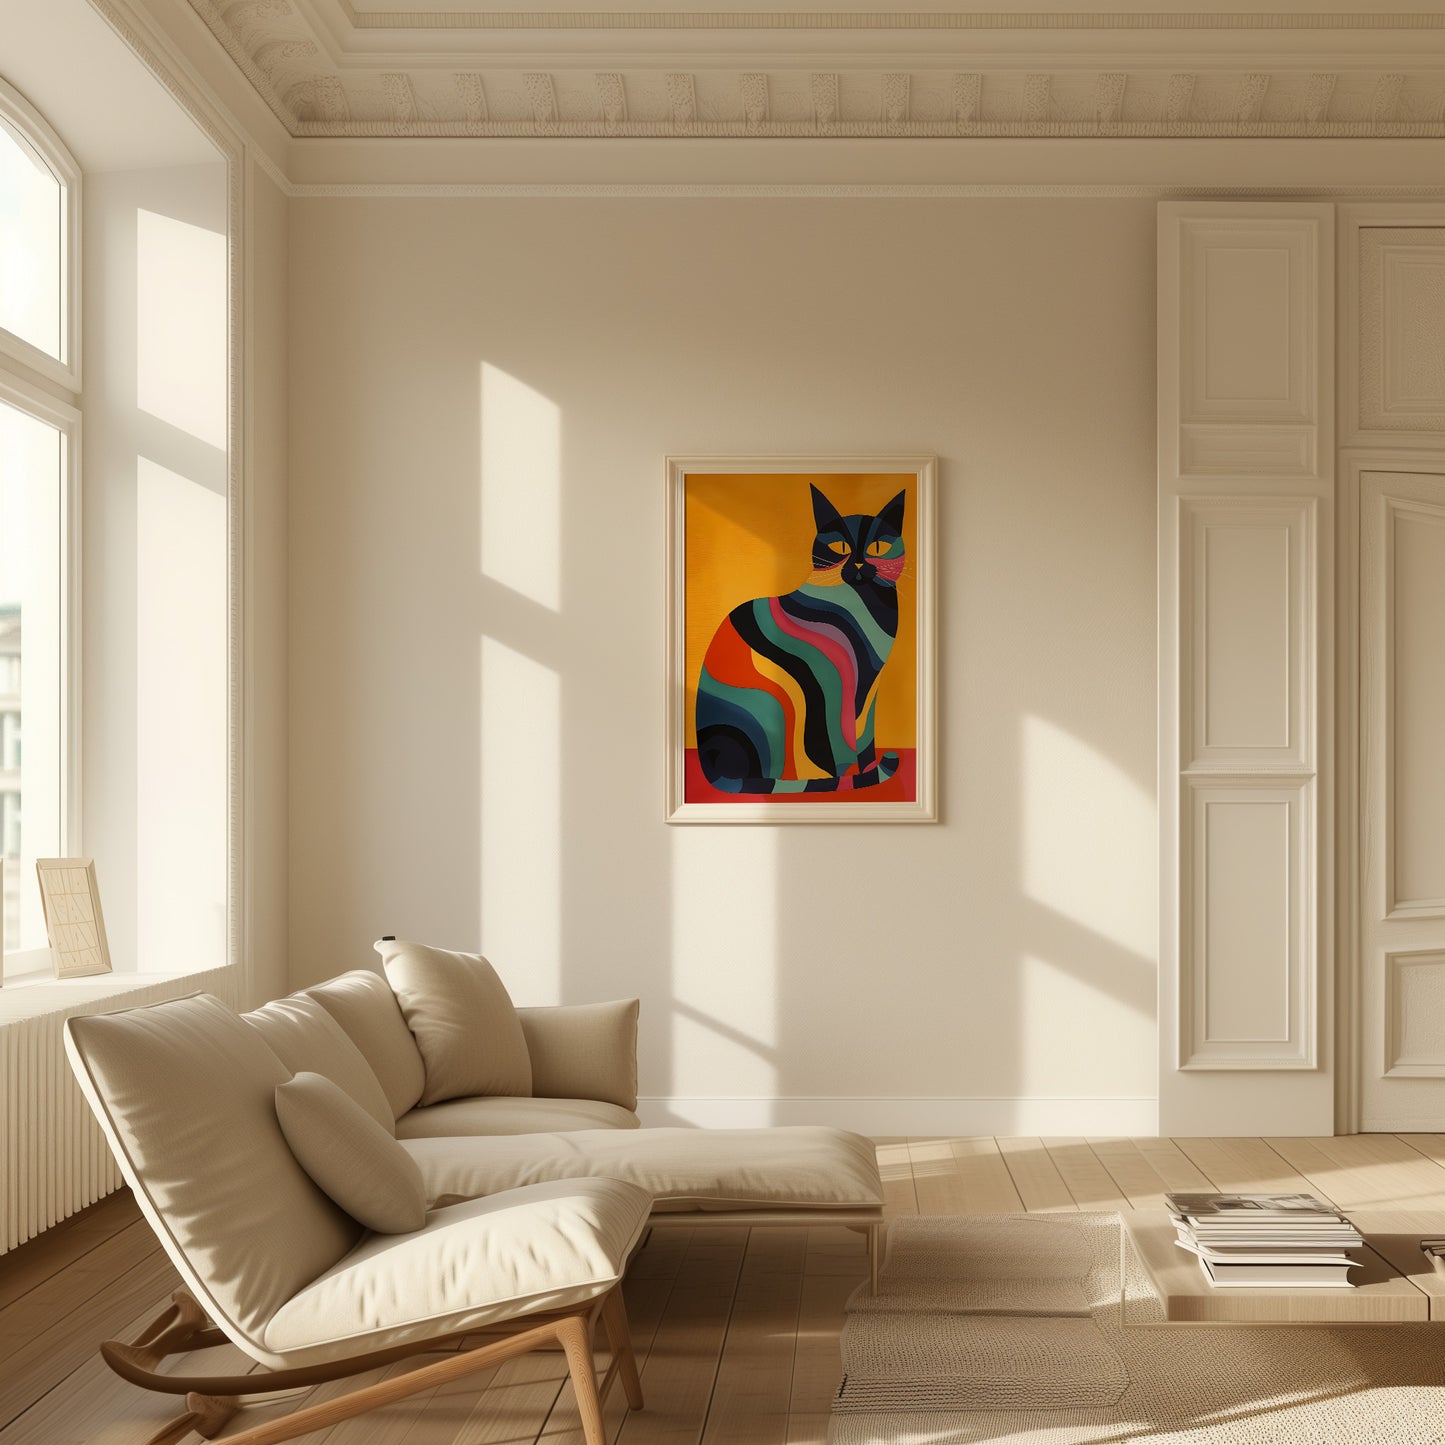 A bright room with a colorful painting of a cat above a sofa.